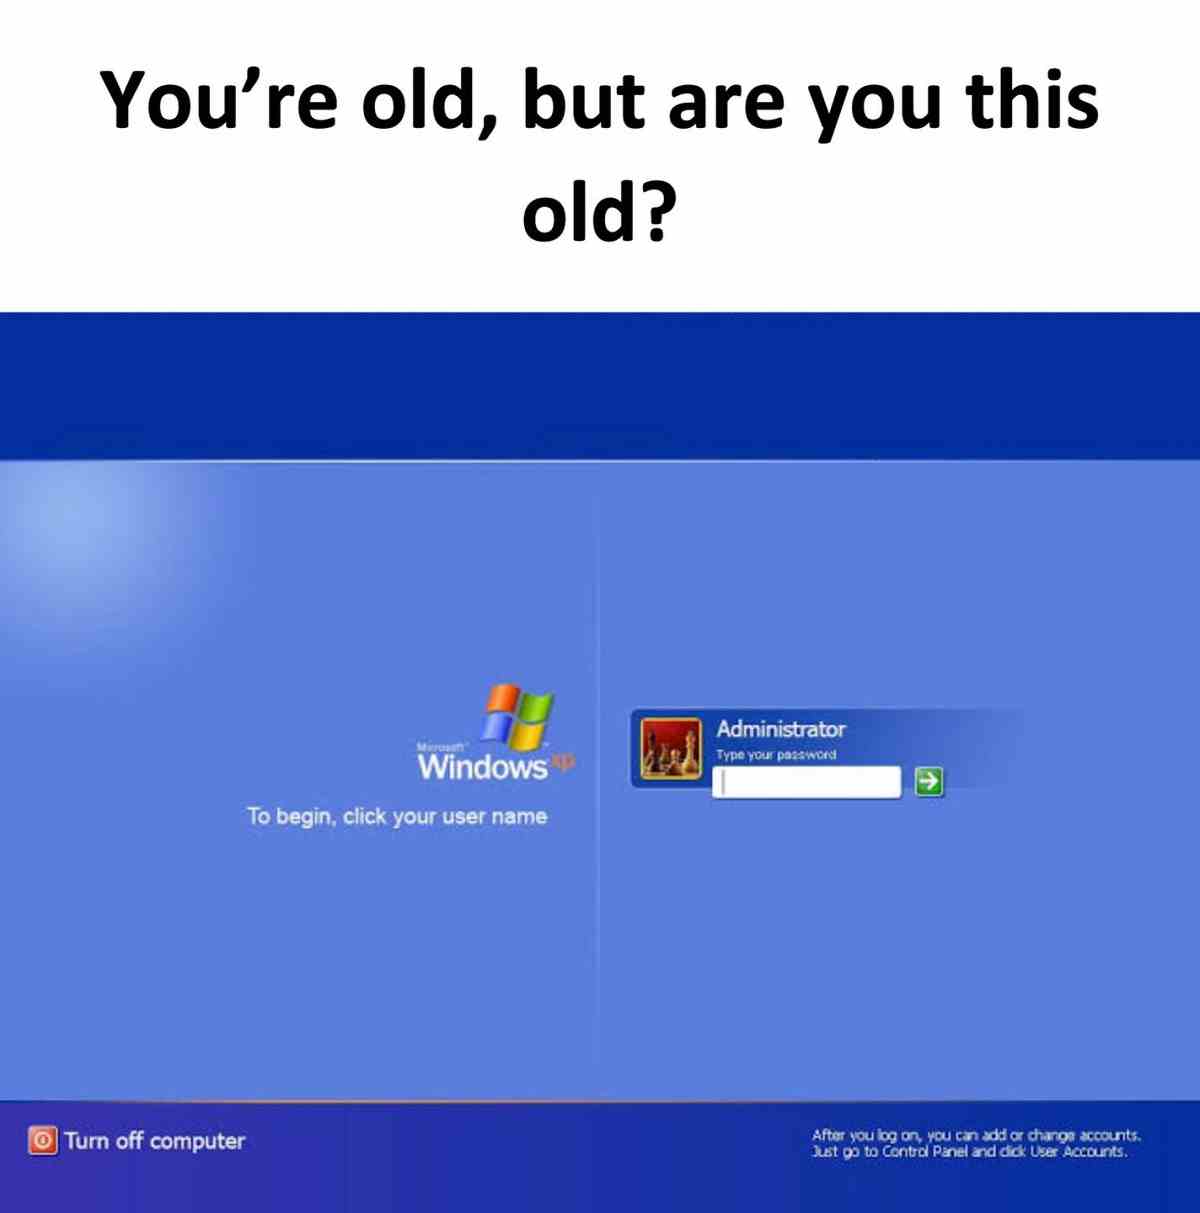 You're old, but are you this old?